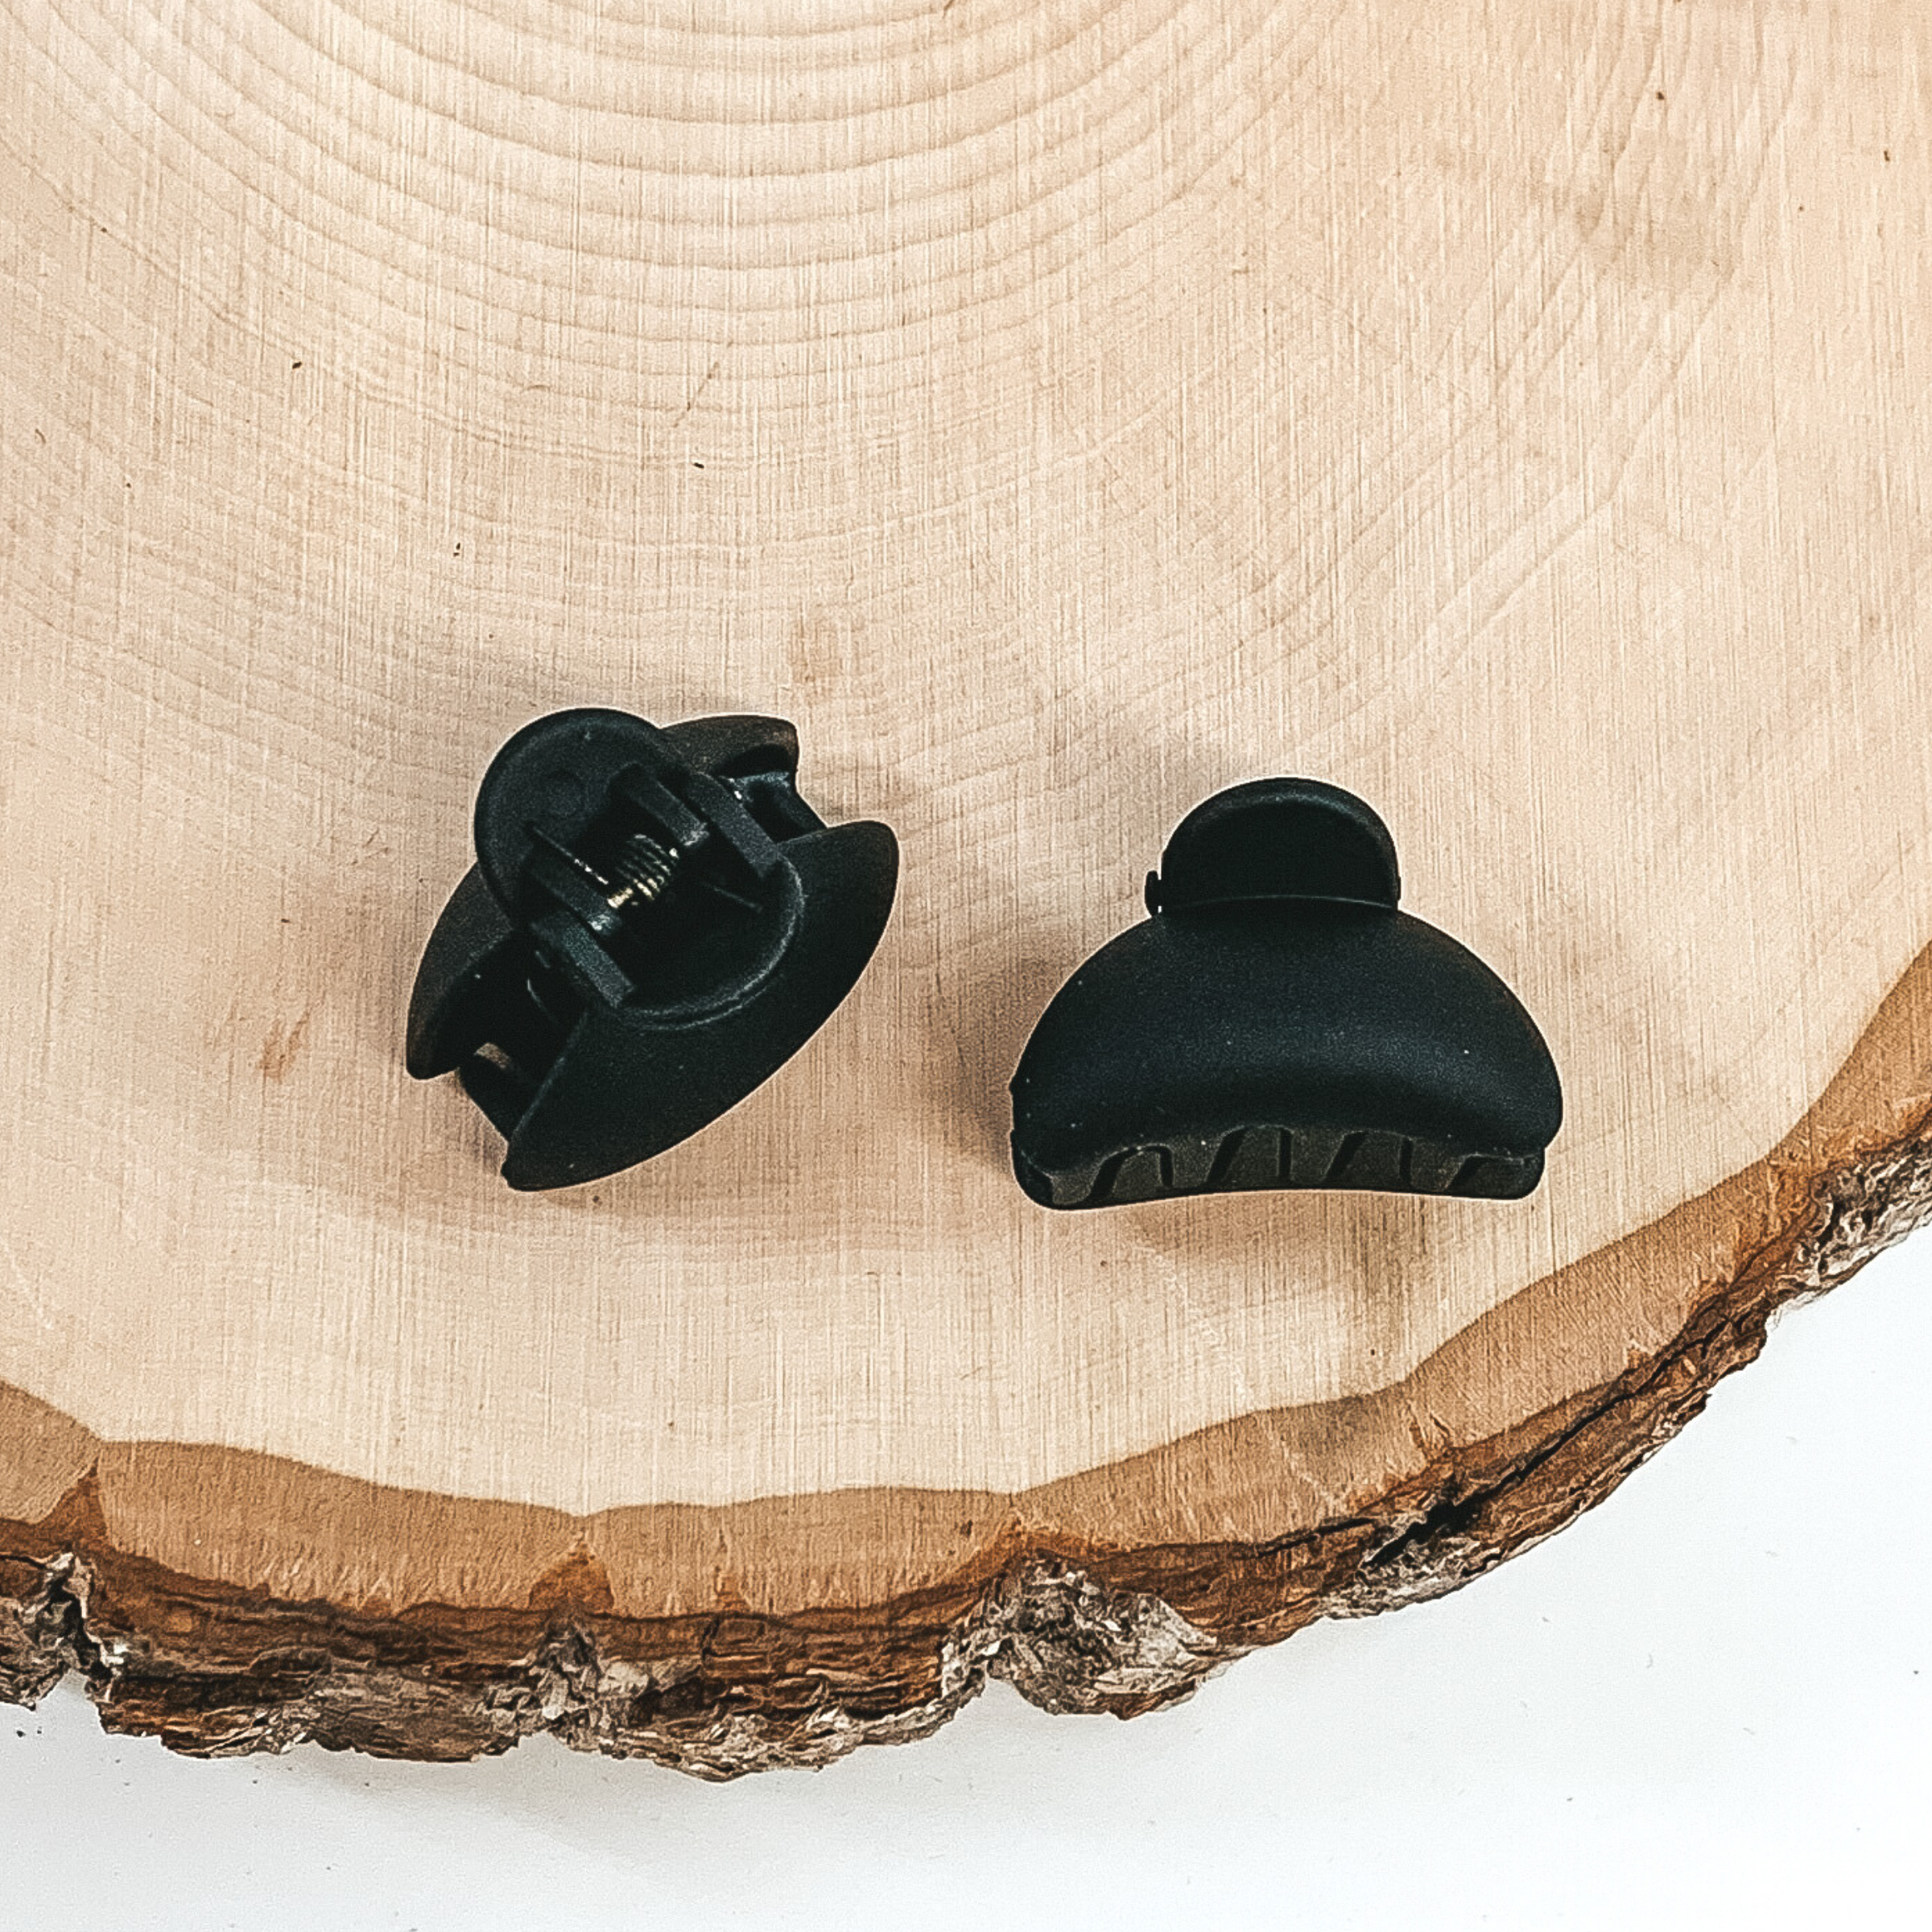 Matte black oval claw clips with an oval cutout. This clip is pictured on a piece of wood on a white background.